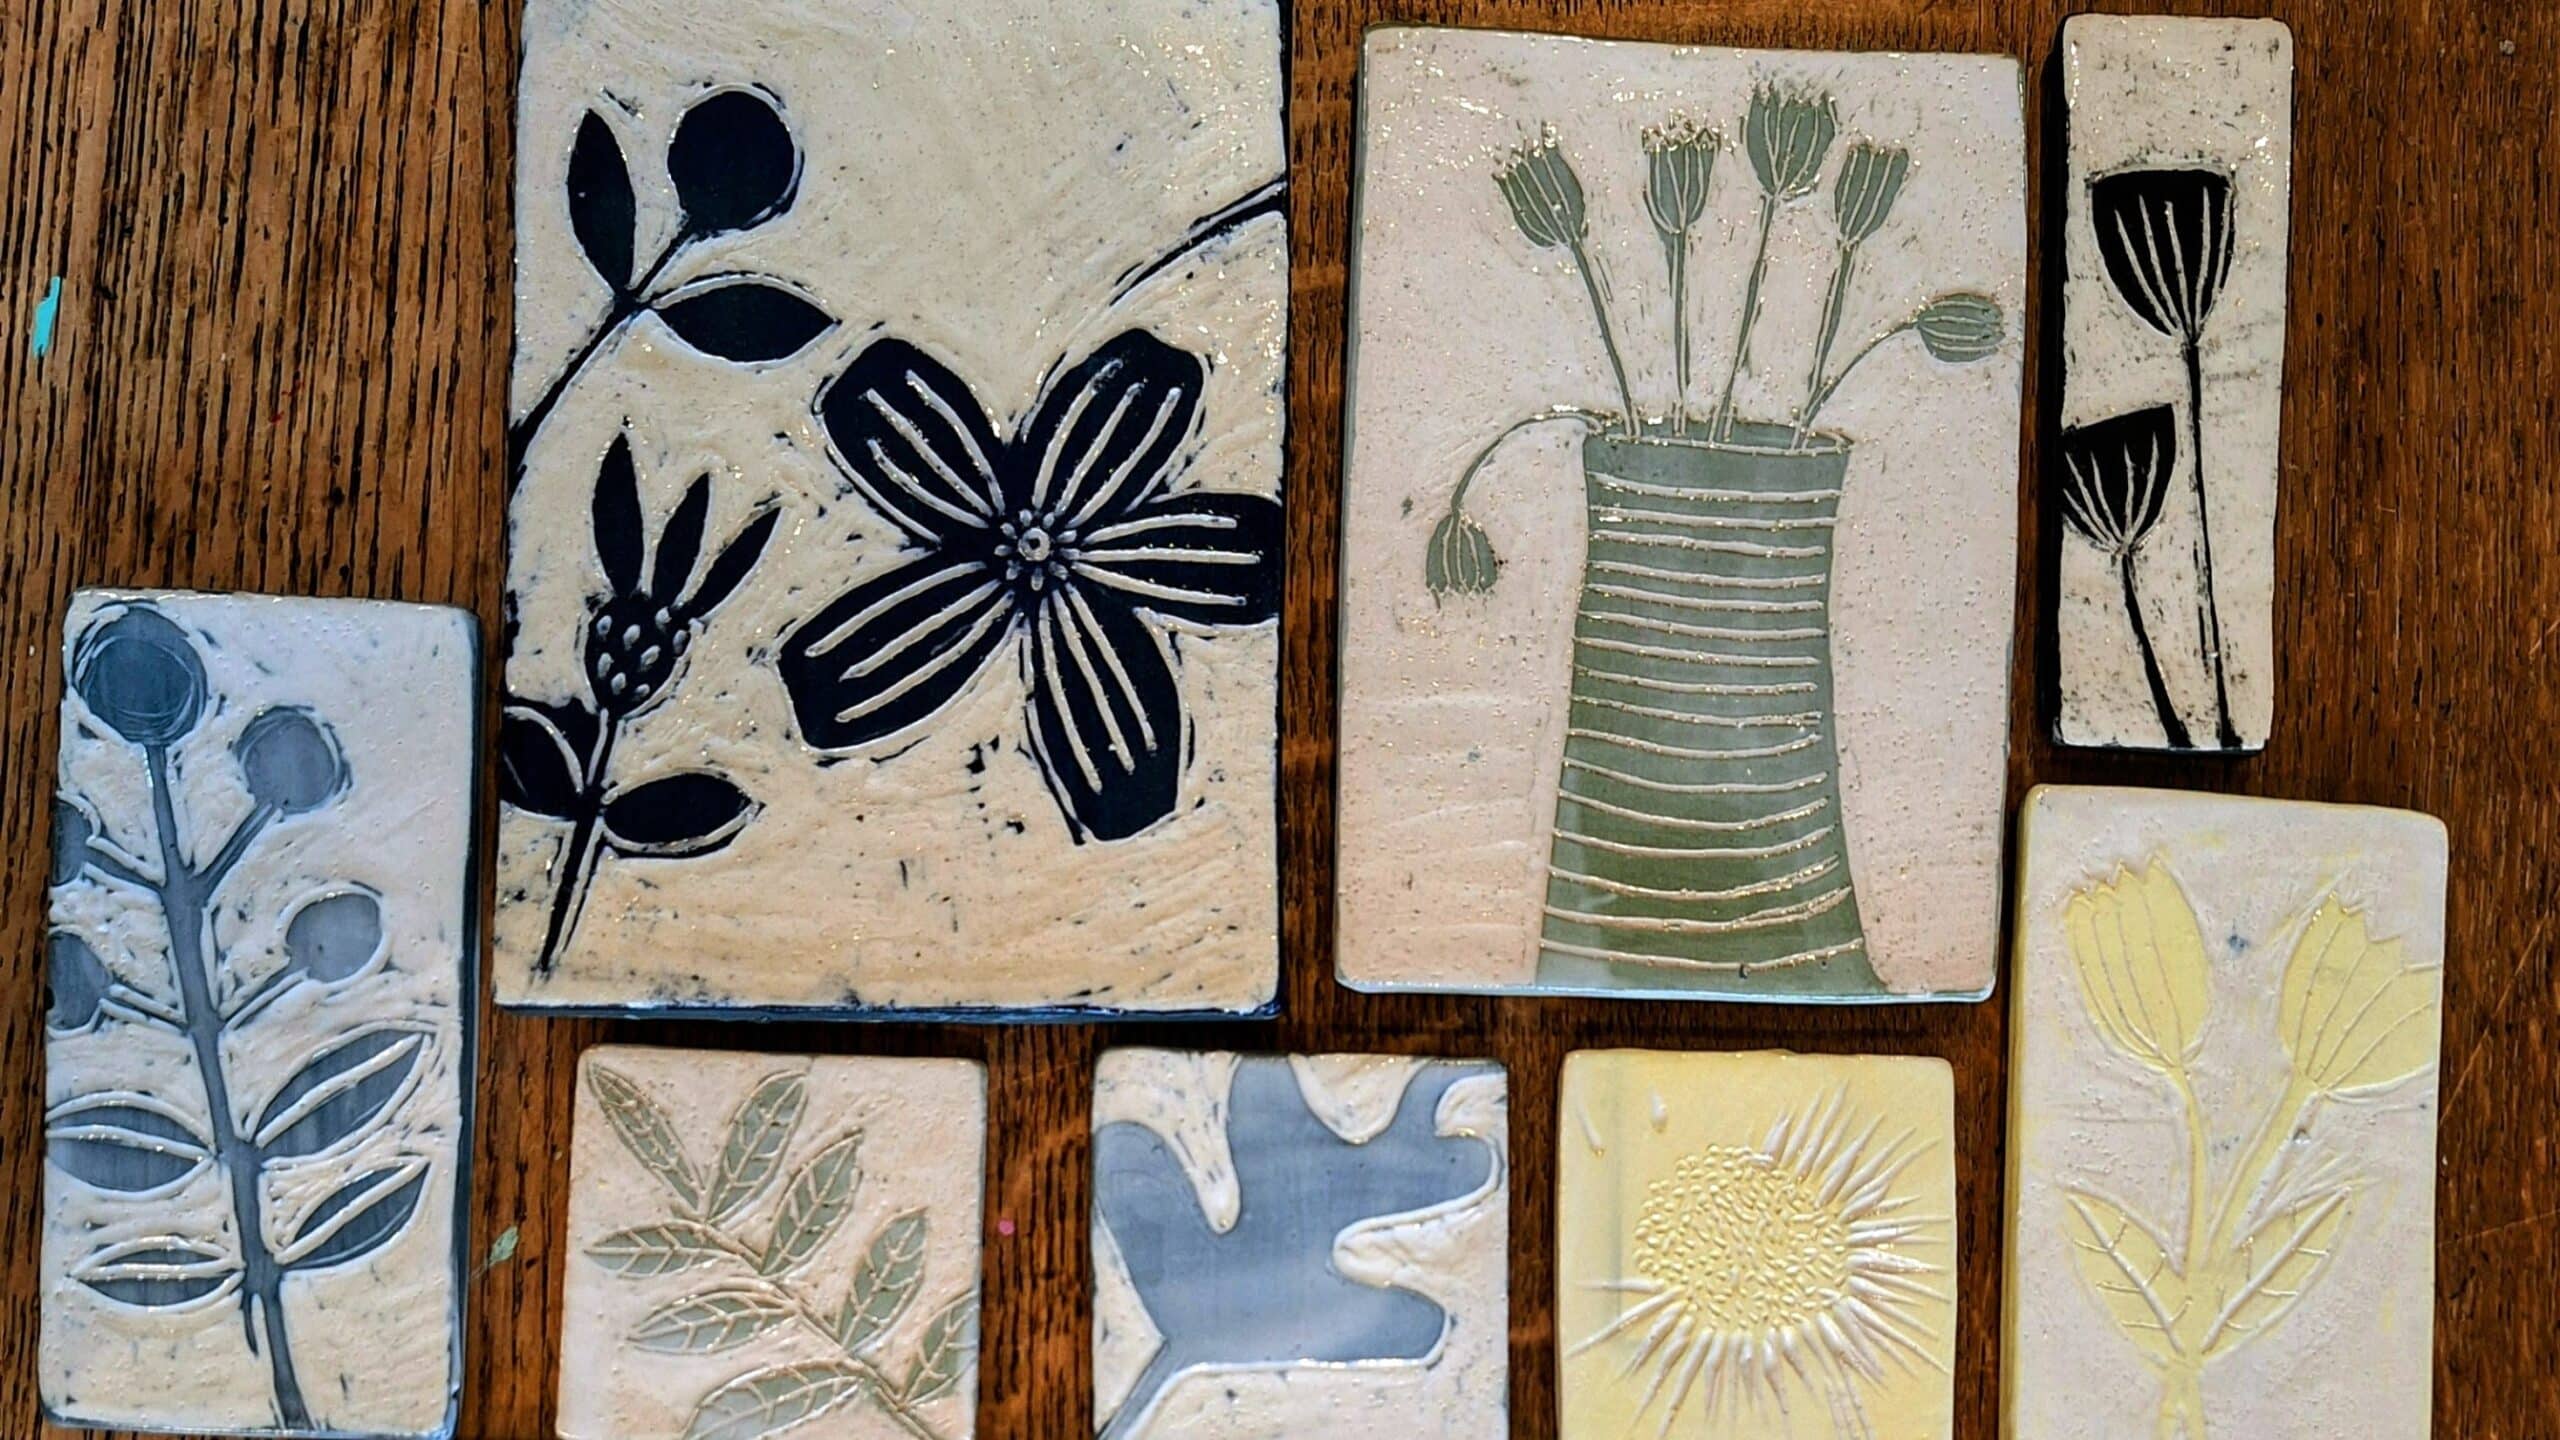 Photograph of a set of decorative tiles laid out on a wooden table. Each tile has been hand-decorated and features a different image, but they're all based around garden/ floral themes